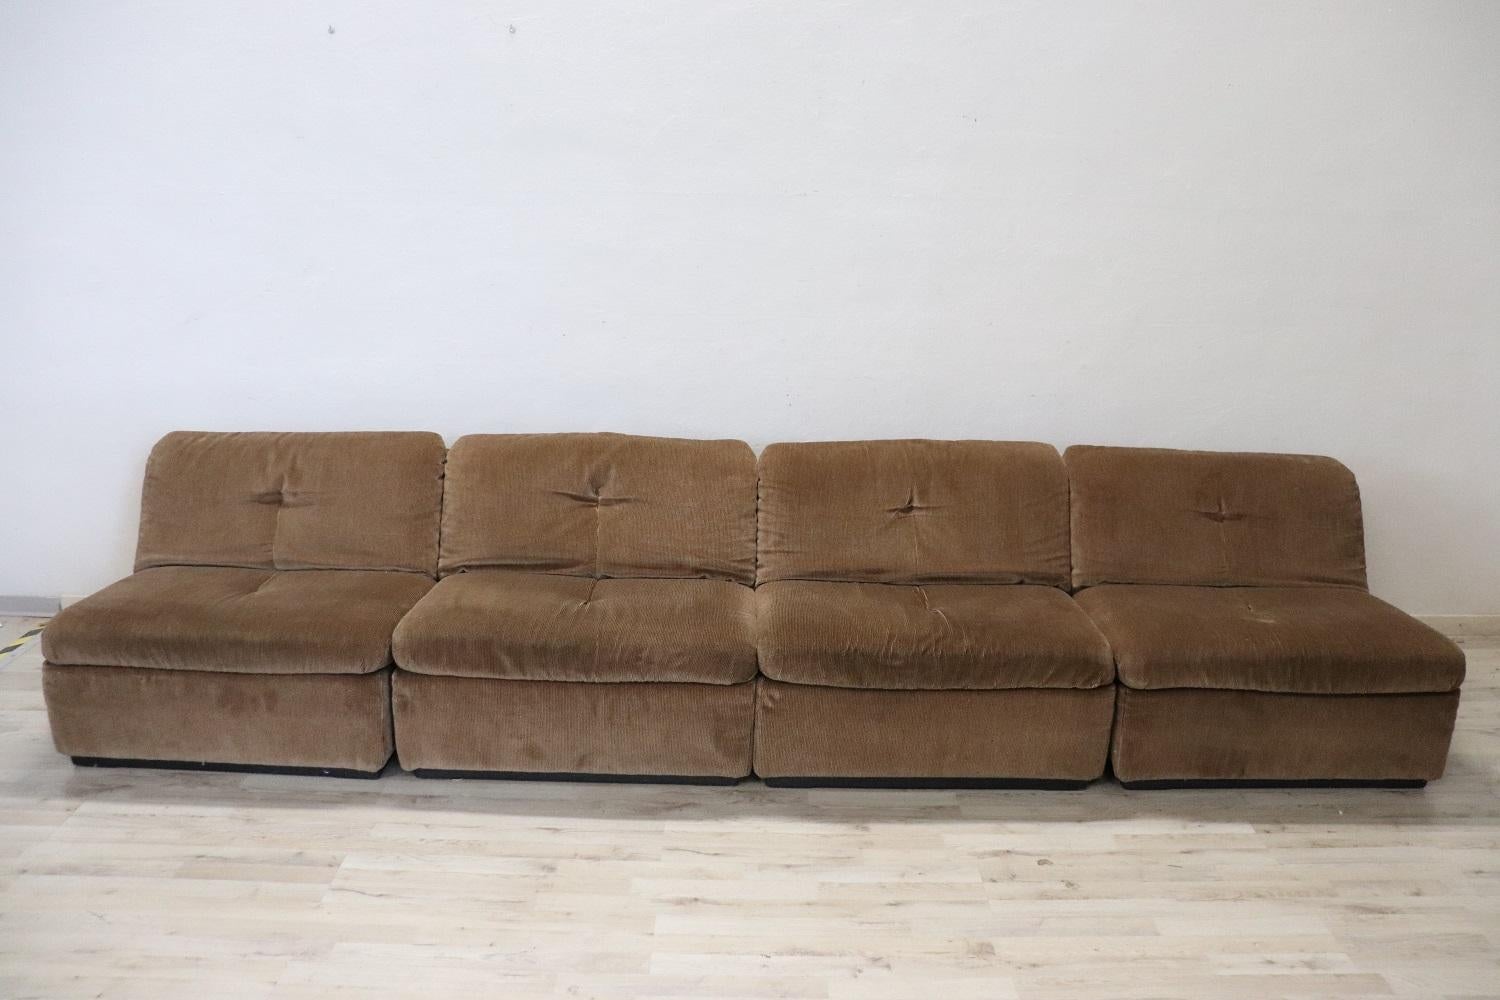 Rare Italian design modular sofa, 1970s in brown velvet. The sofa is modular and made up of four armchairs. Busnelli brand present on each armchair. The measurements indicated are for each single armchair.
 